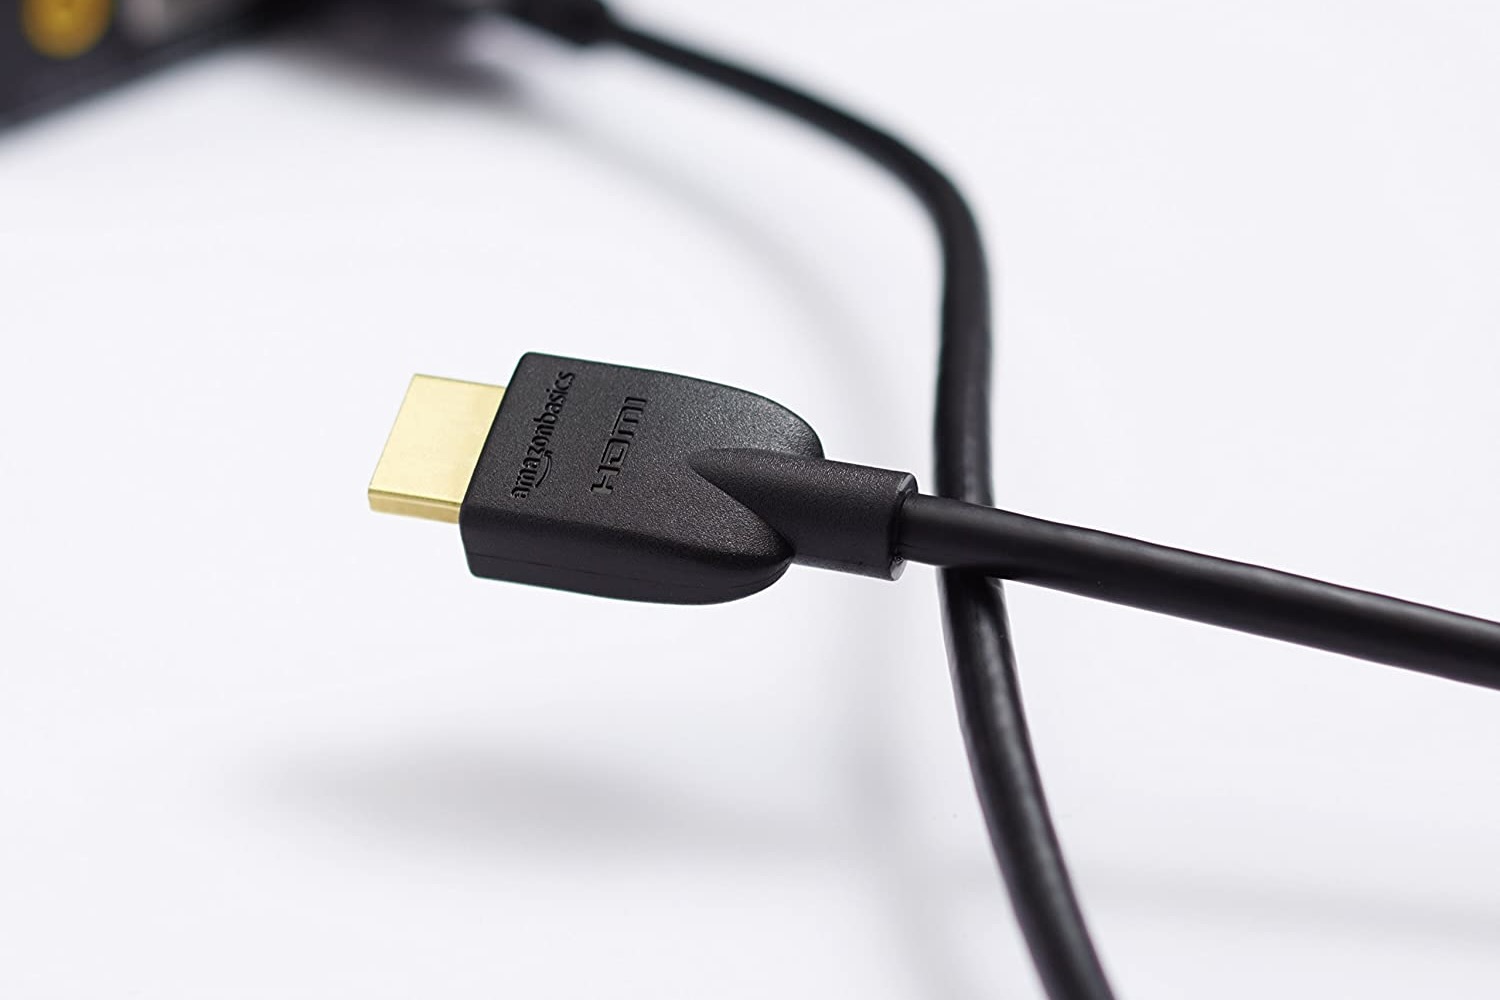 HDMI ARC digital optical: What's the difference? | Digital Trends